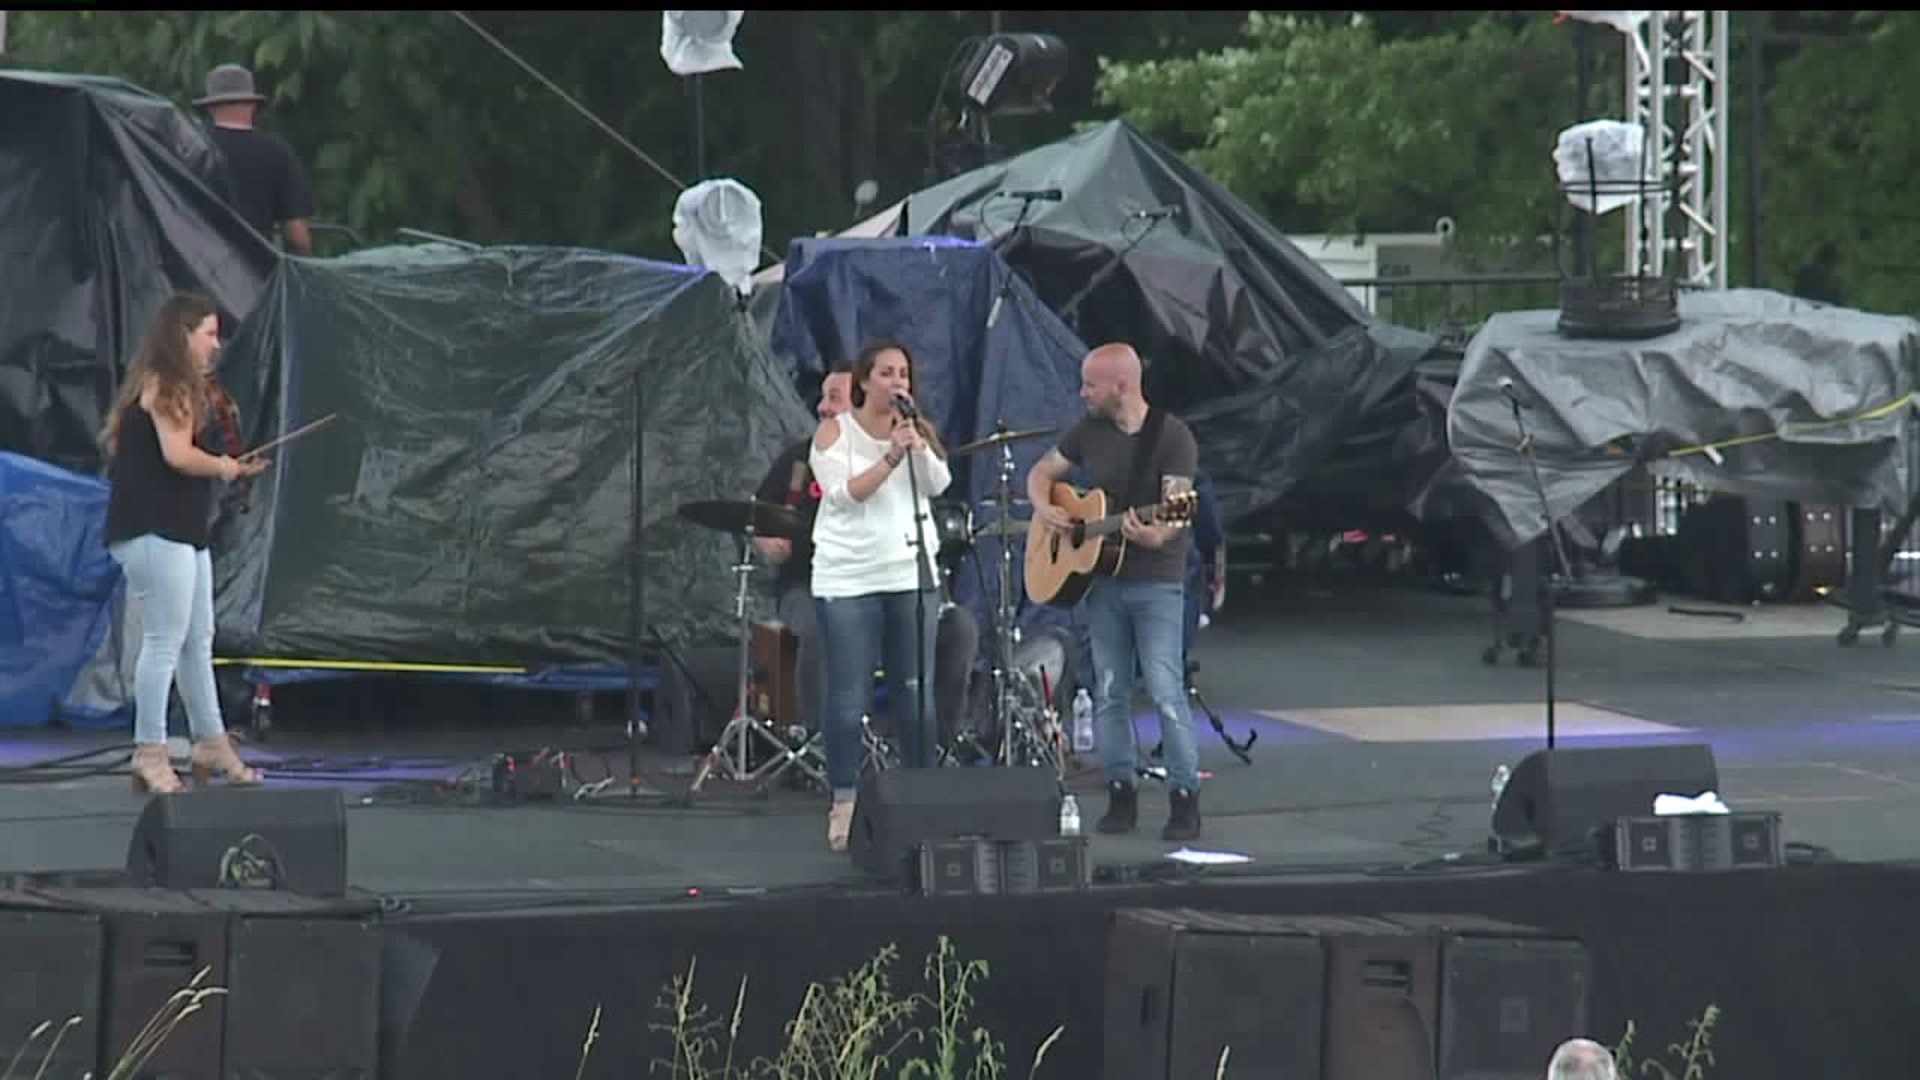 Straws and Stripes Music Fest at Vineyard at Hershey giving back to local veterans